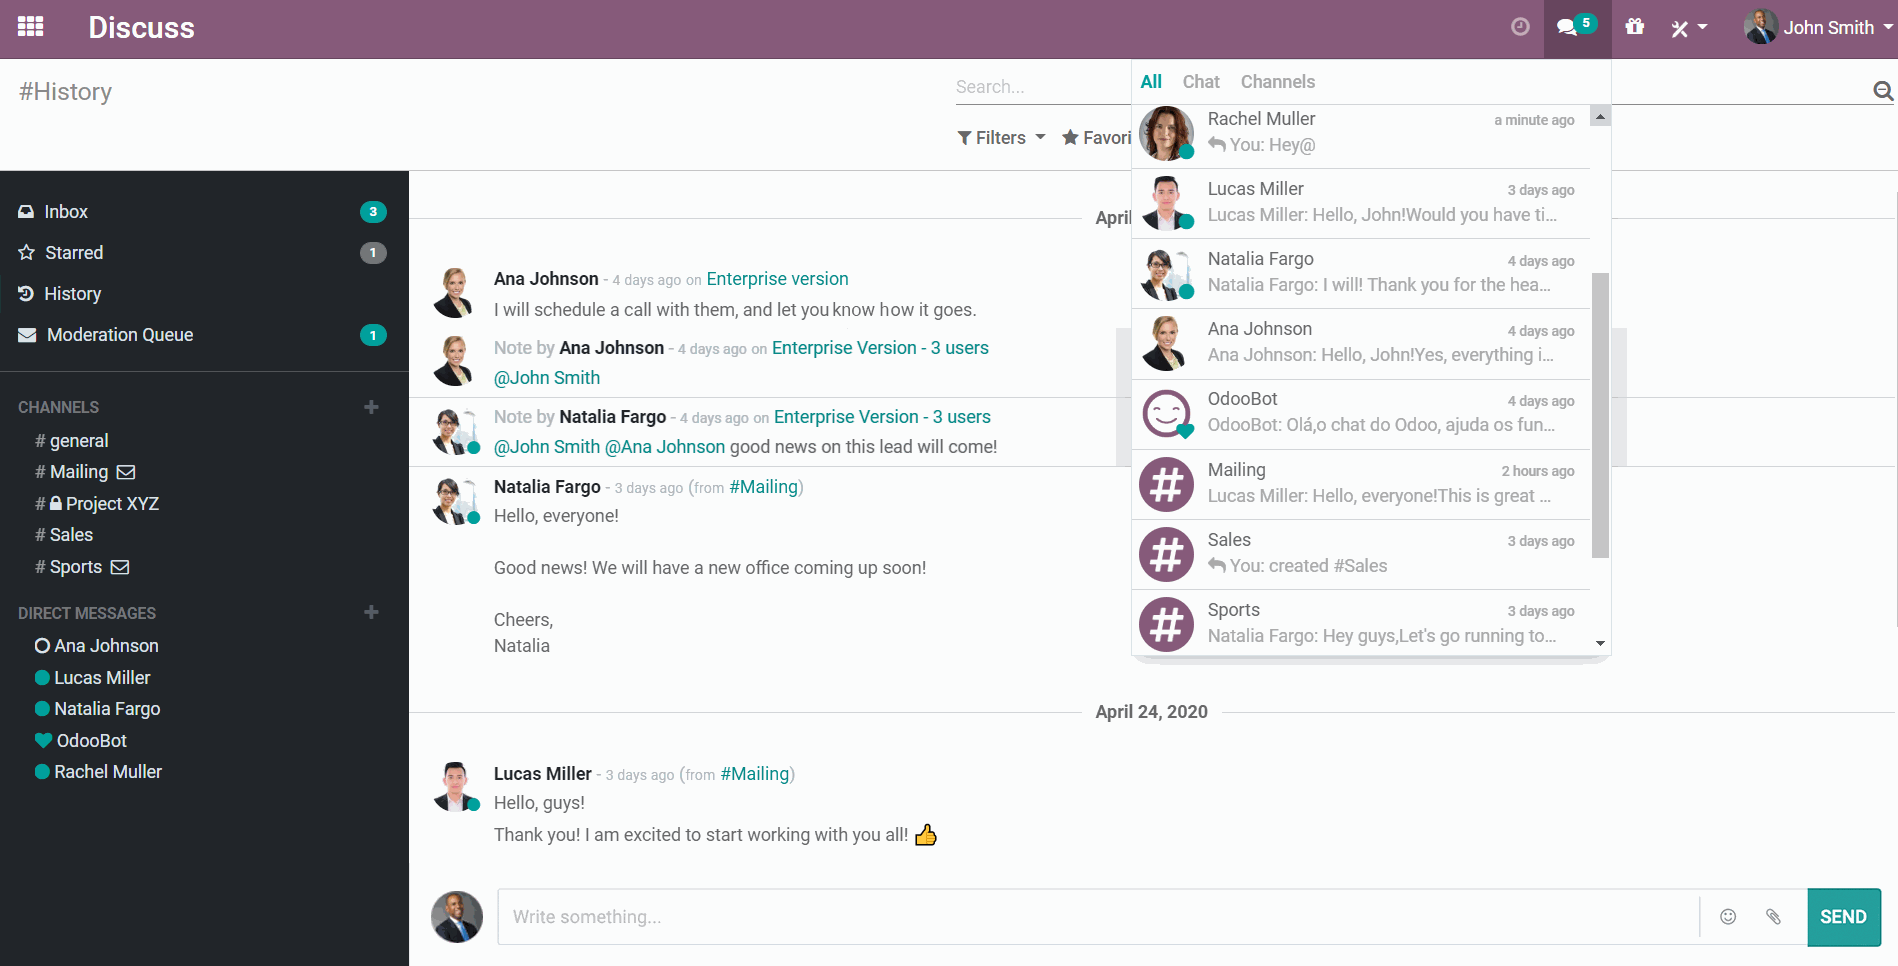 Odoo Discuss interface showing notifications for messages